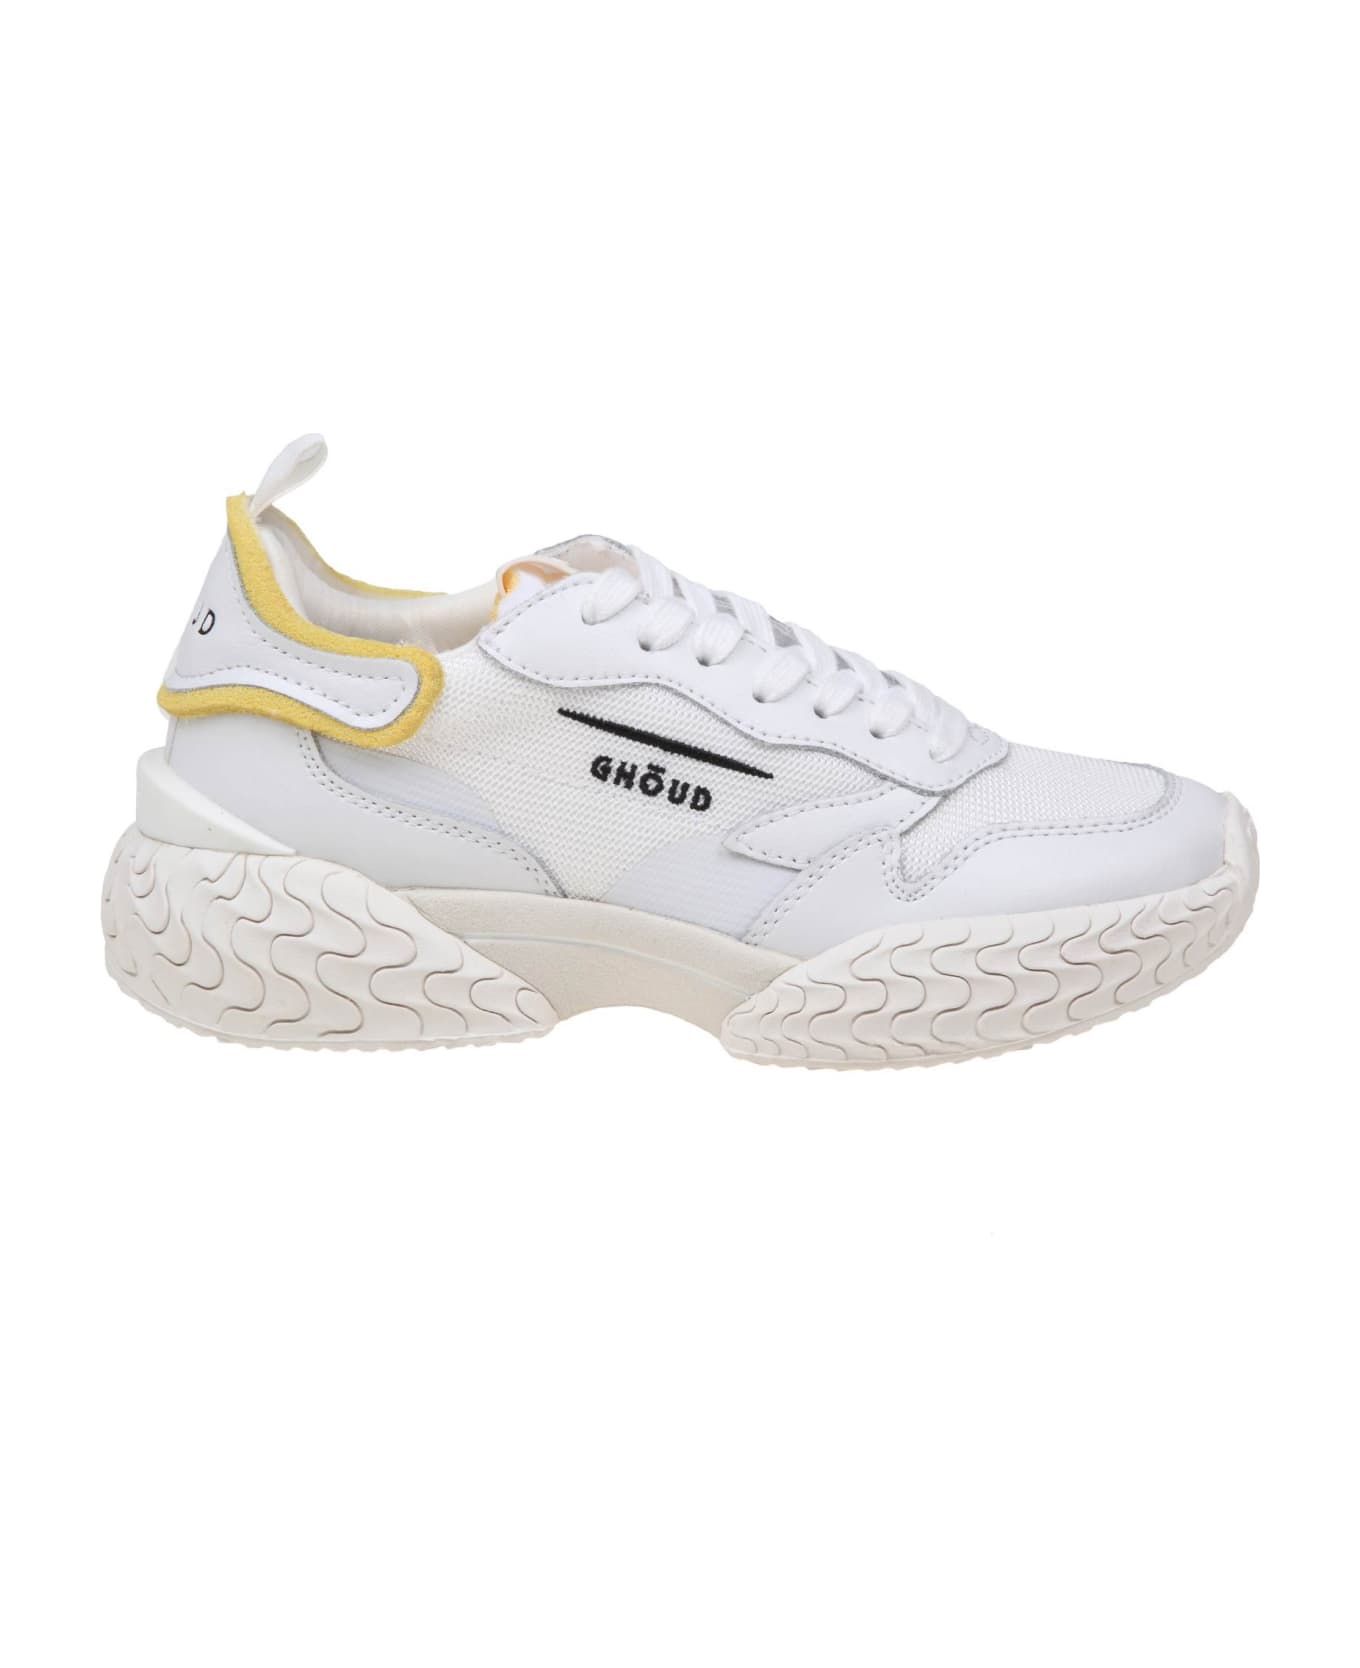 GHOUD Tyre Low Sneakers In Leather And Fabric - MESH/LEAT WHITE